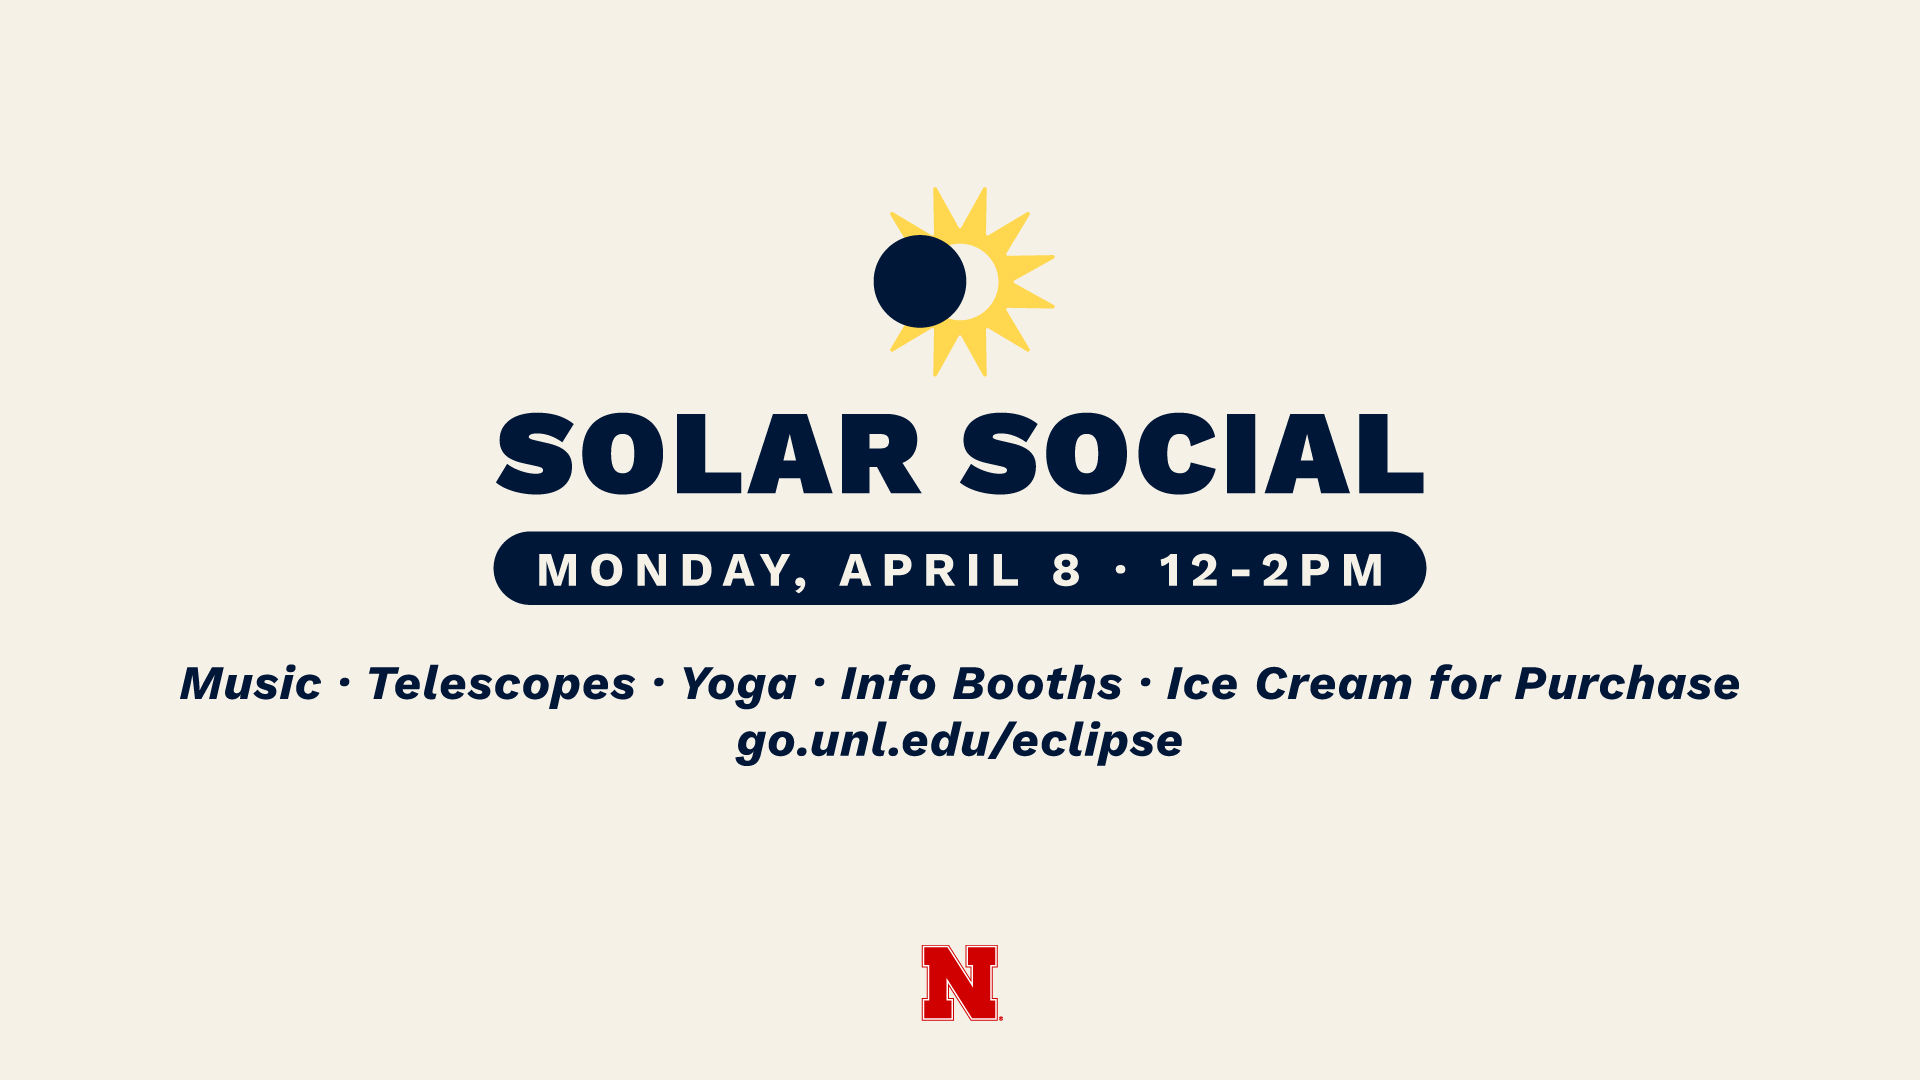 Come celebrate the first total solar eclipse in the United States since 2017 with music, ice cream for purchase, educational booths, yoga, and more.